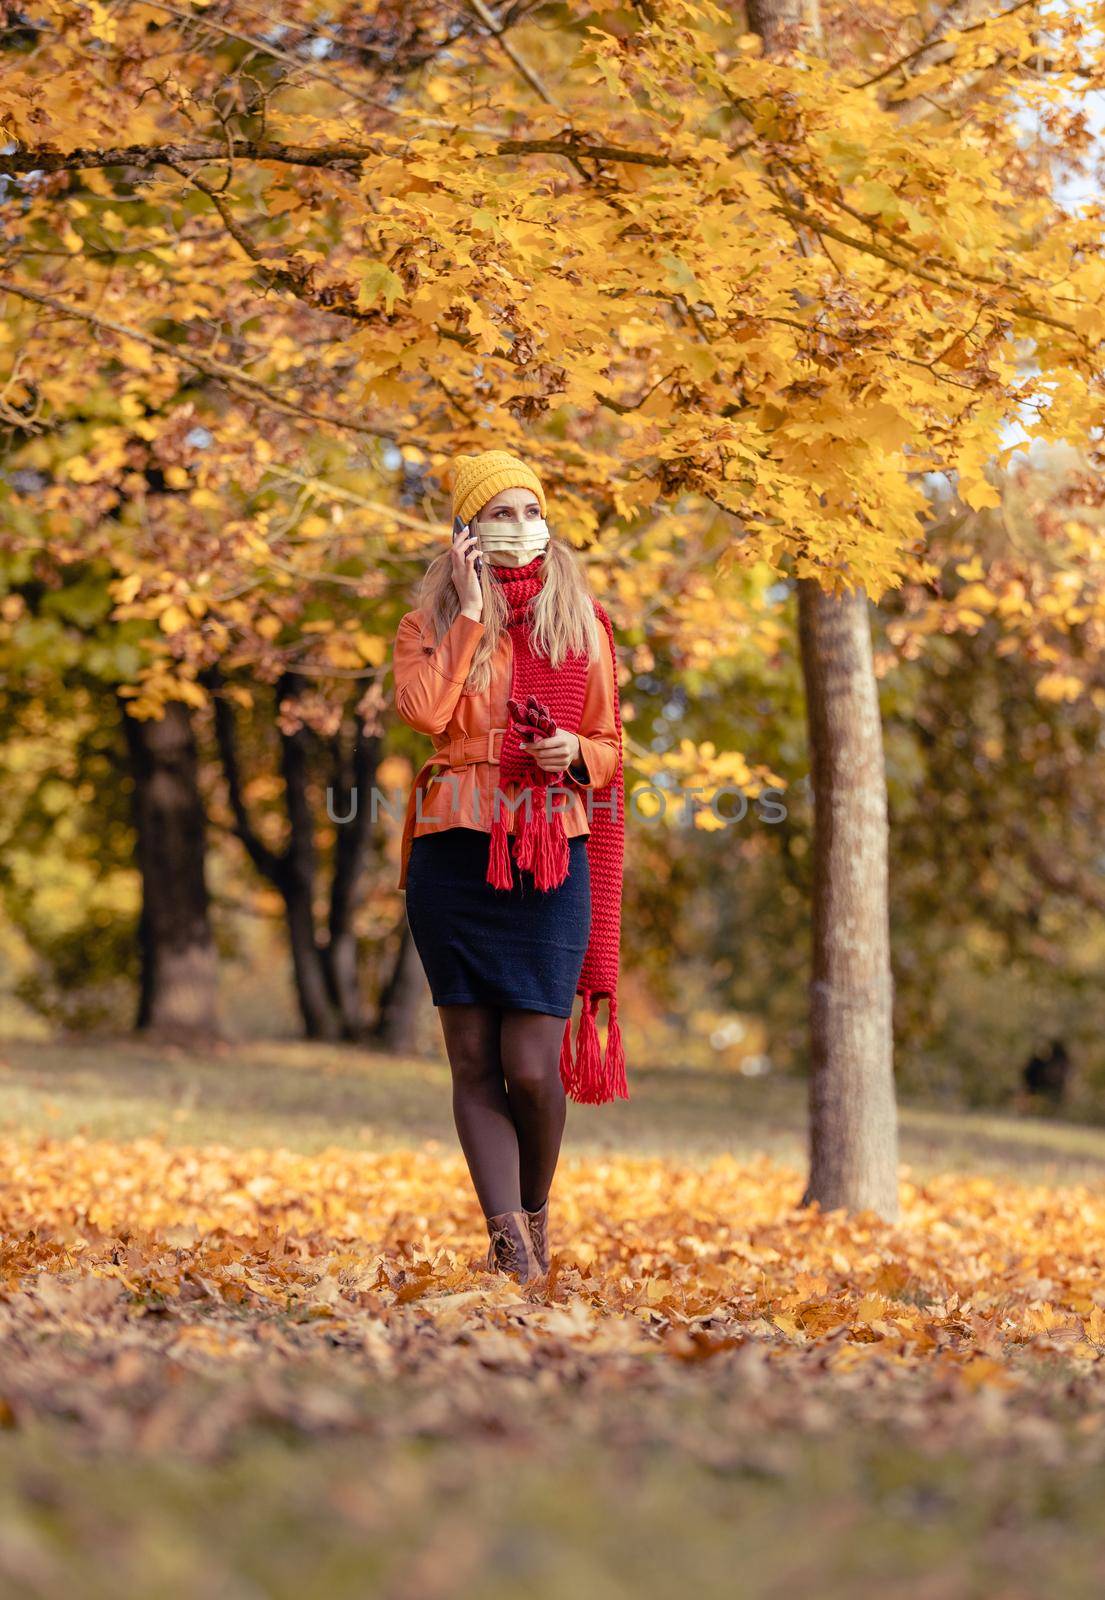 Woman using her phone having walk in fall park during coronavirus crisis amidst colorful foliage